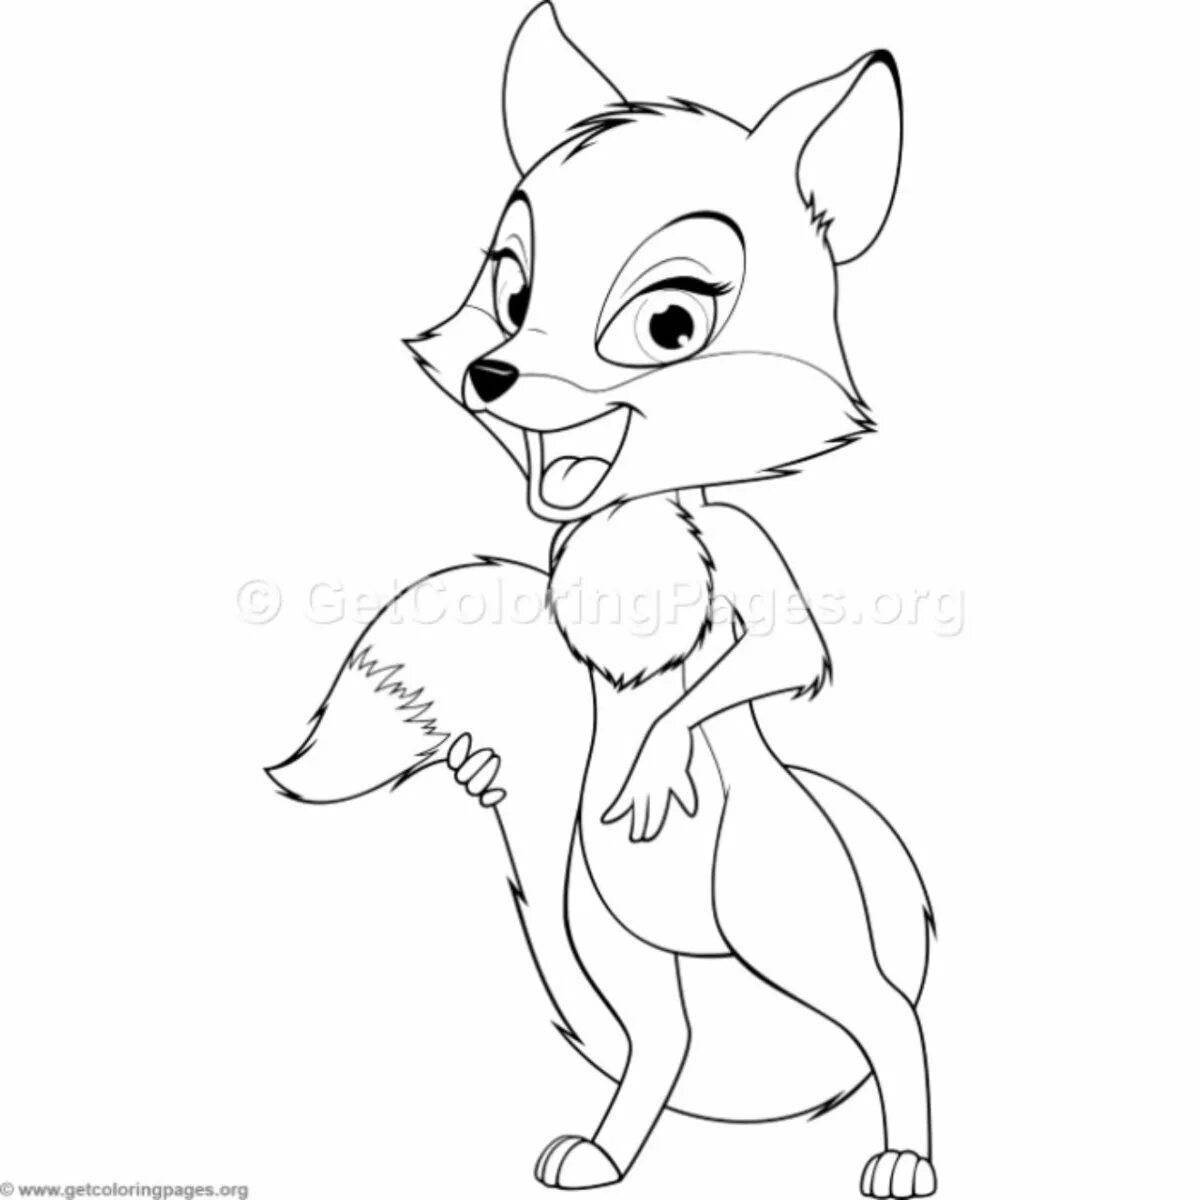 Coloring page playful cunning fox